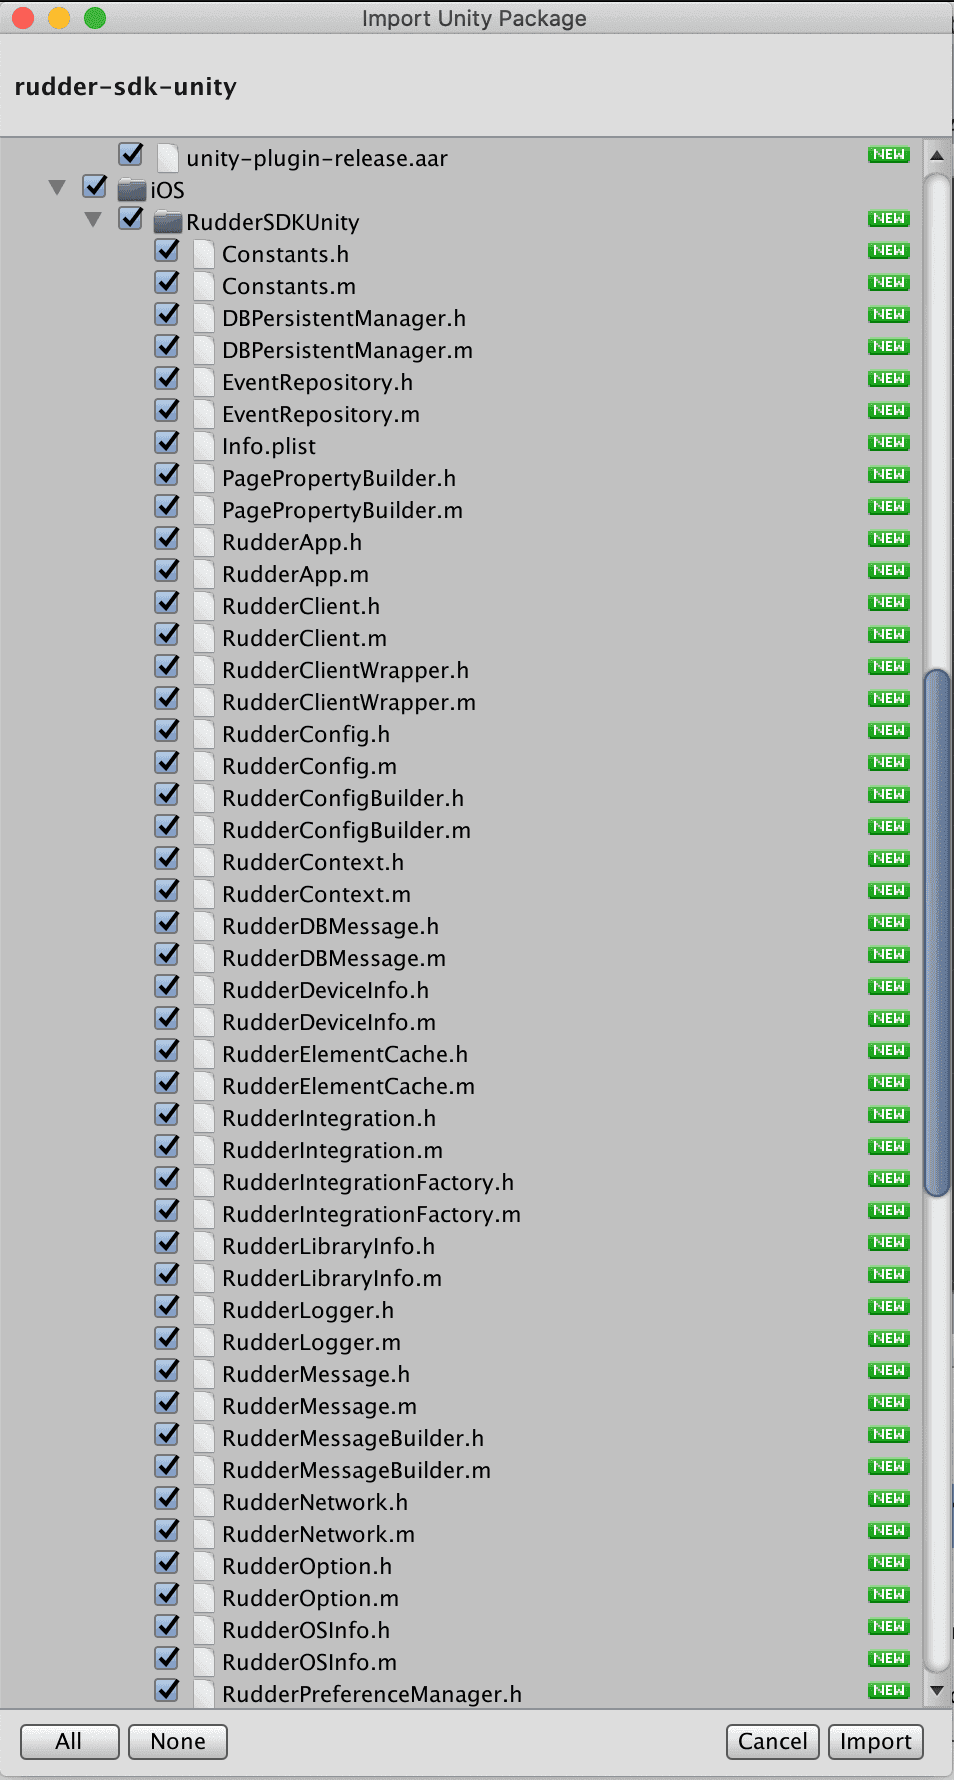 Importing the Unity package